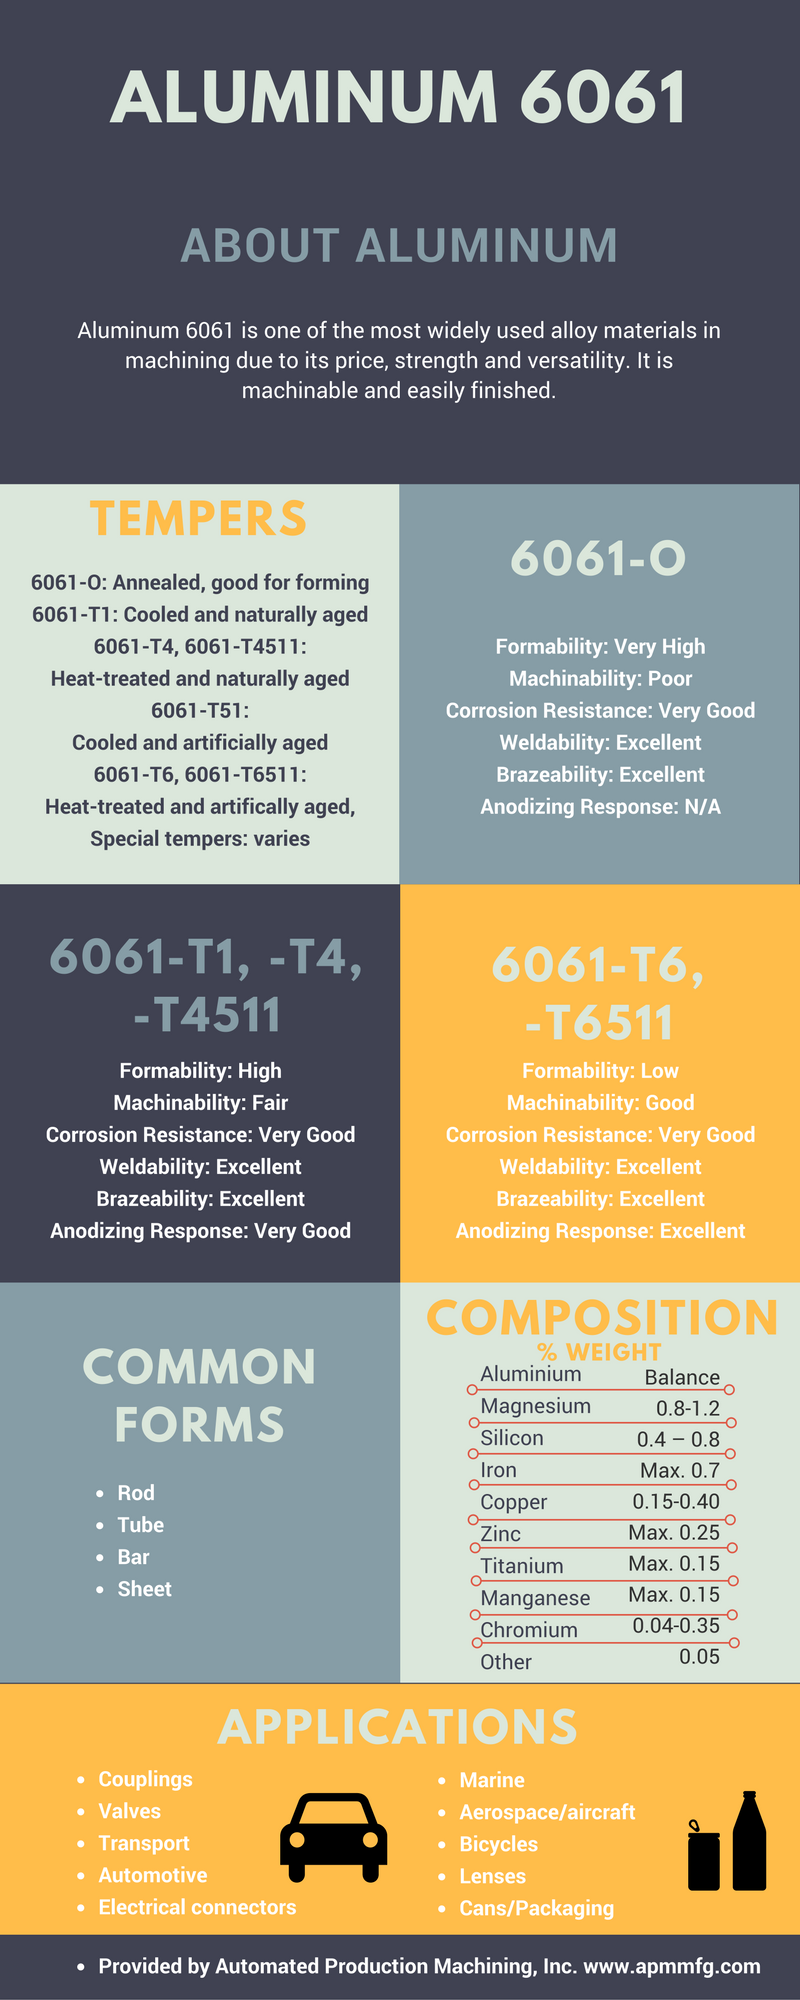 aluminum 6061 infographic: tempers, common forms, composition, applications